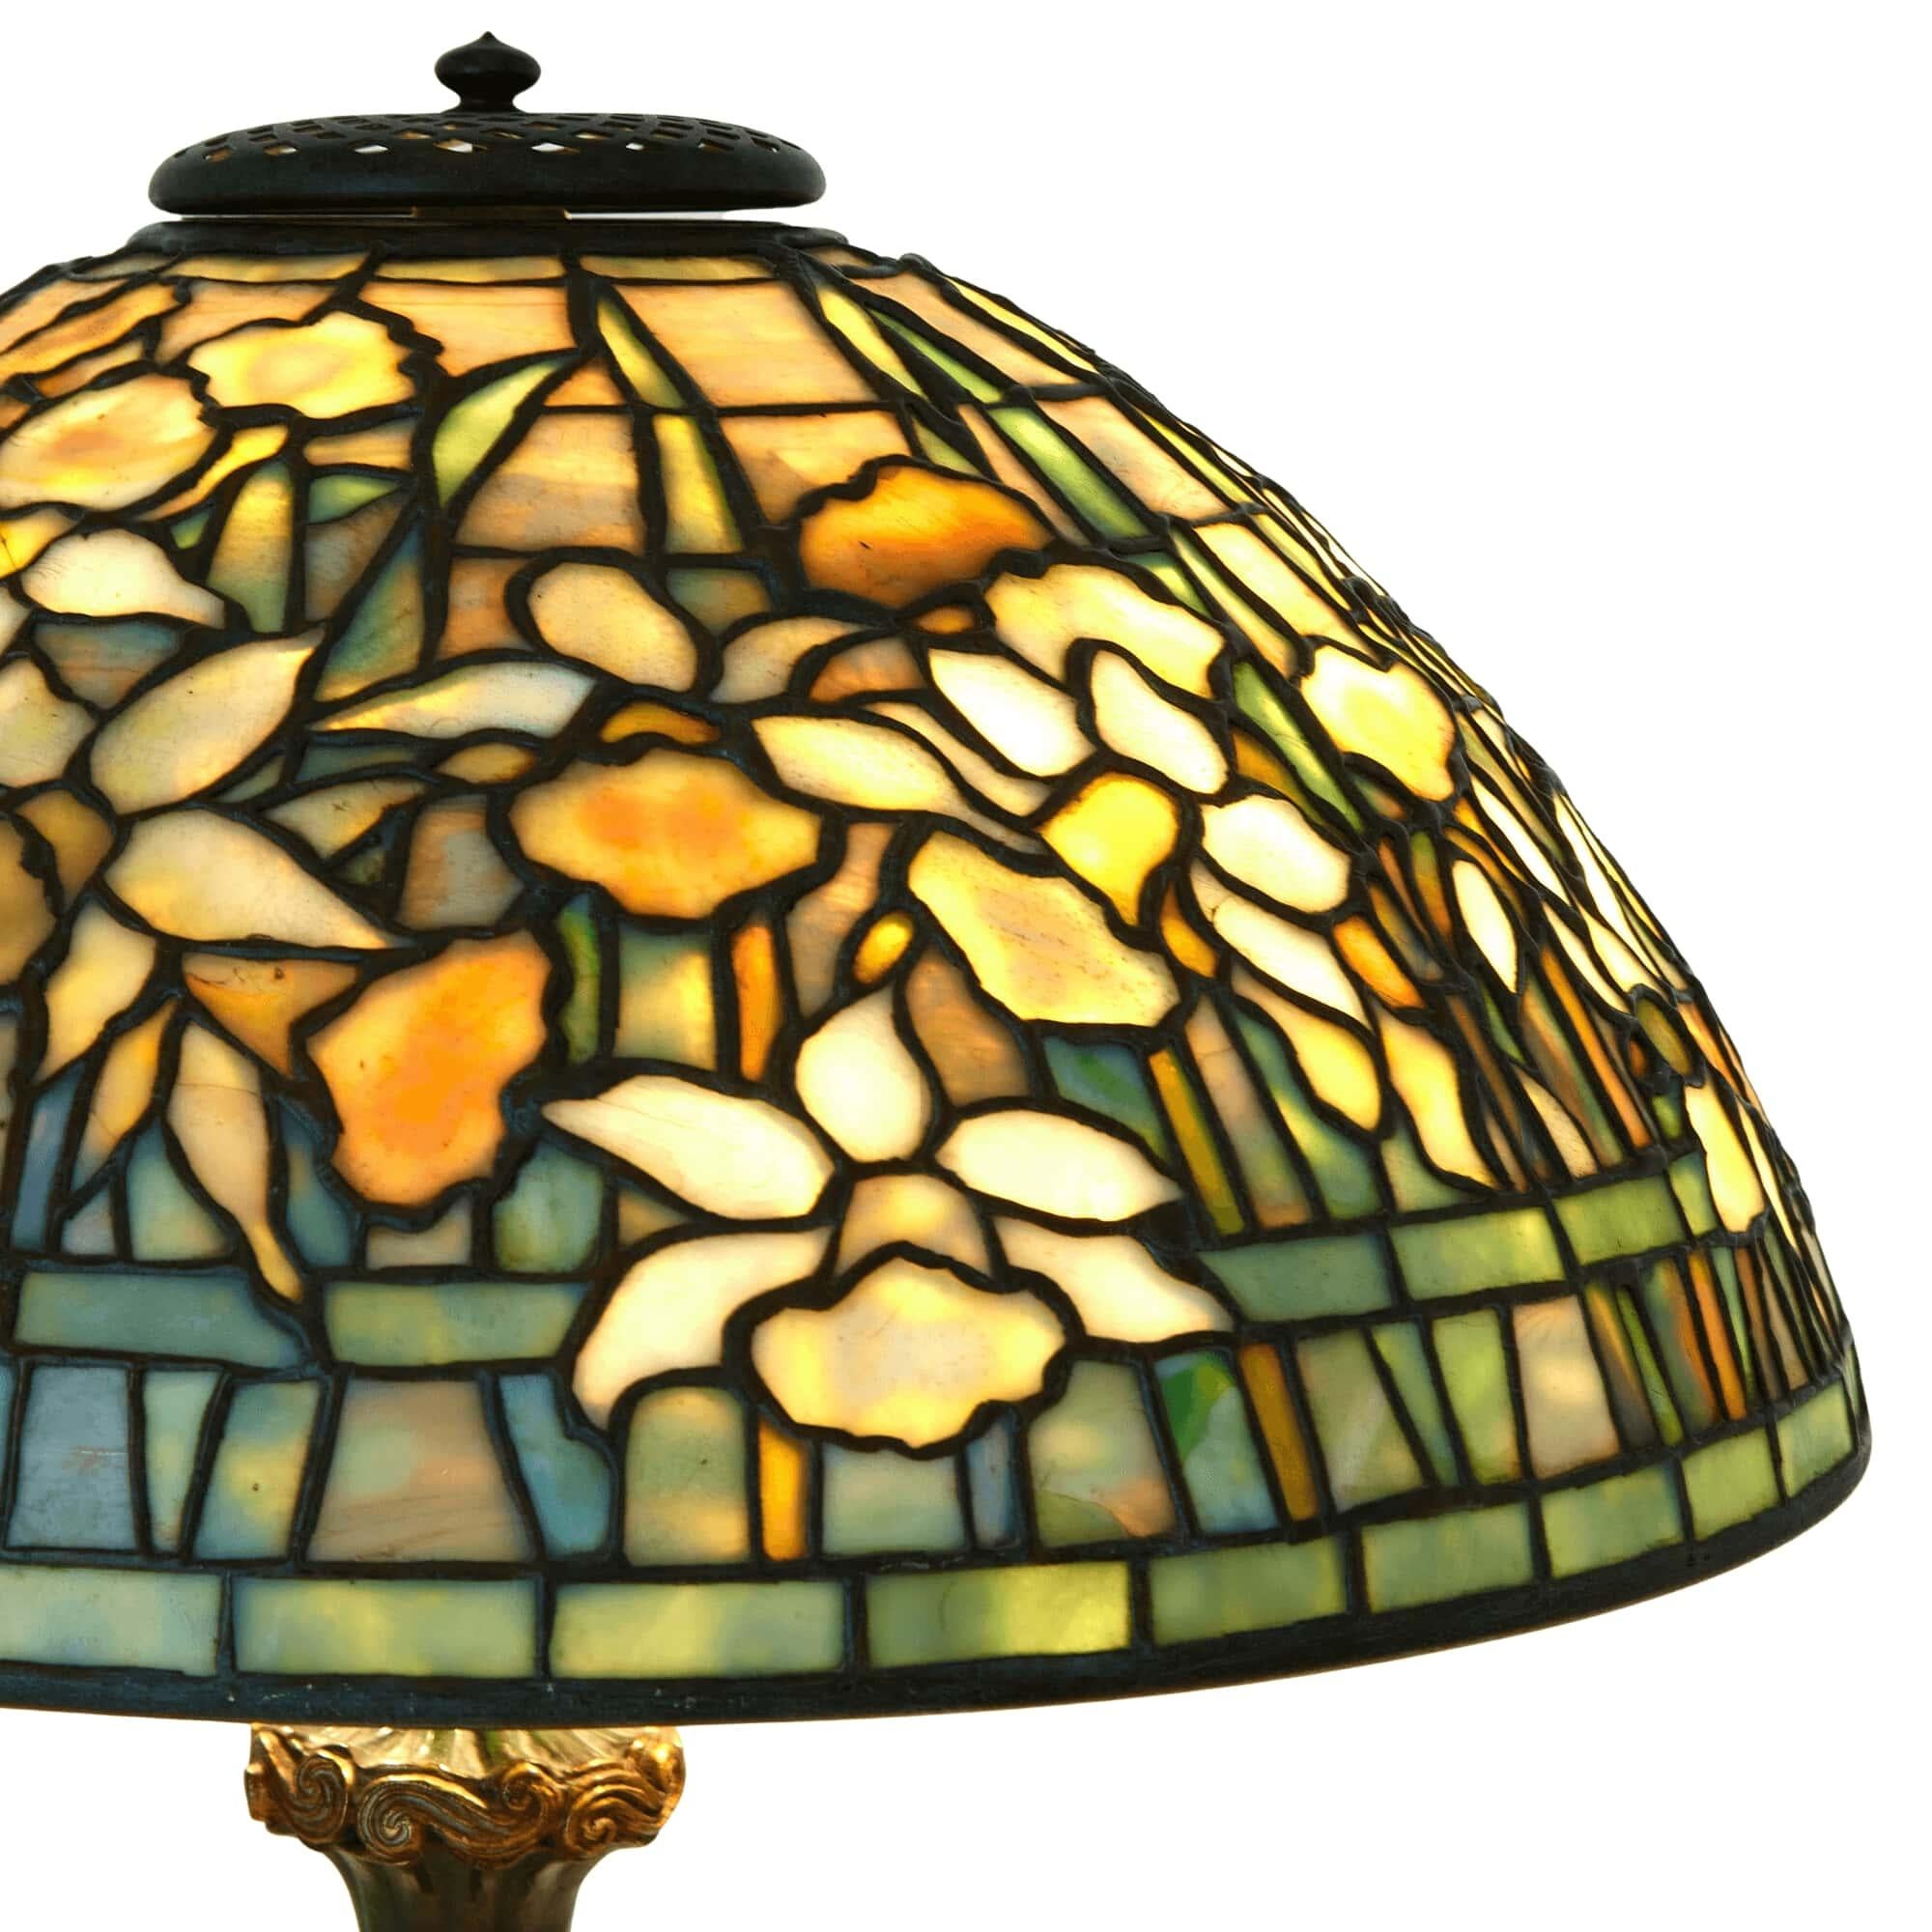 ‘Daffodil’ table lamp by Tiffany Studios
American, c. 1910
Height 56cm, diameter 40cm

Designed and hand-made by the artisans from the renowned Tiffany Studios (1902-1932), this ‘Daffodil’ table lamp is an example of the studio’s creations which are